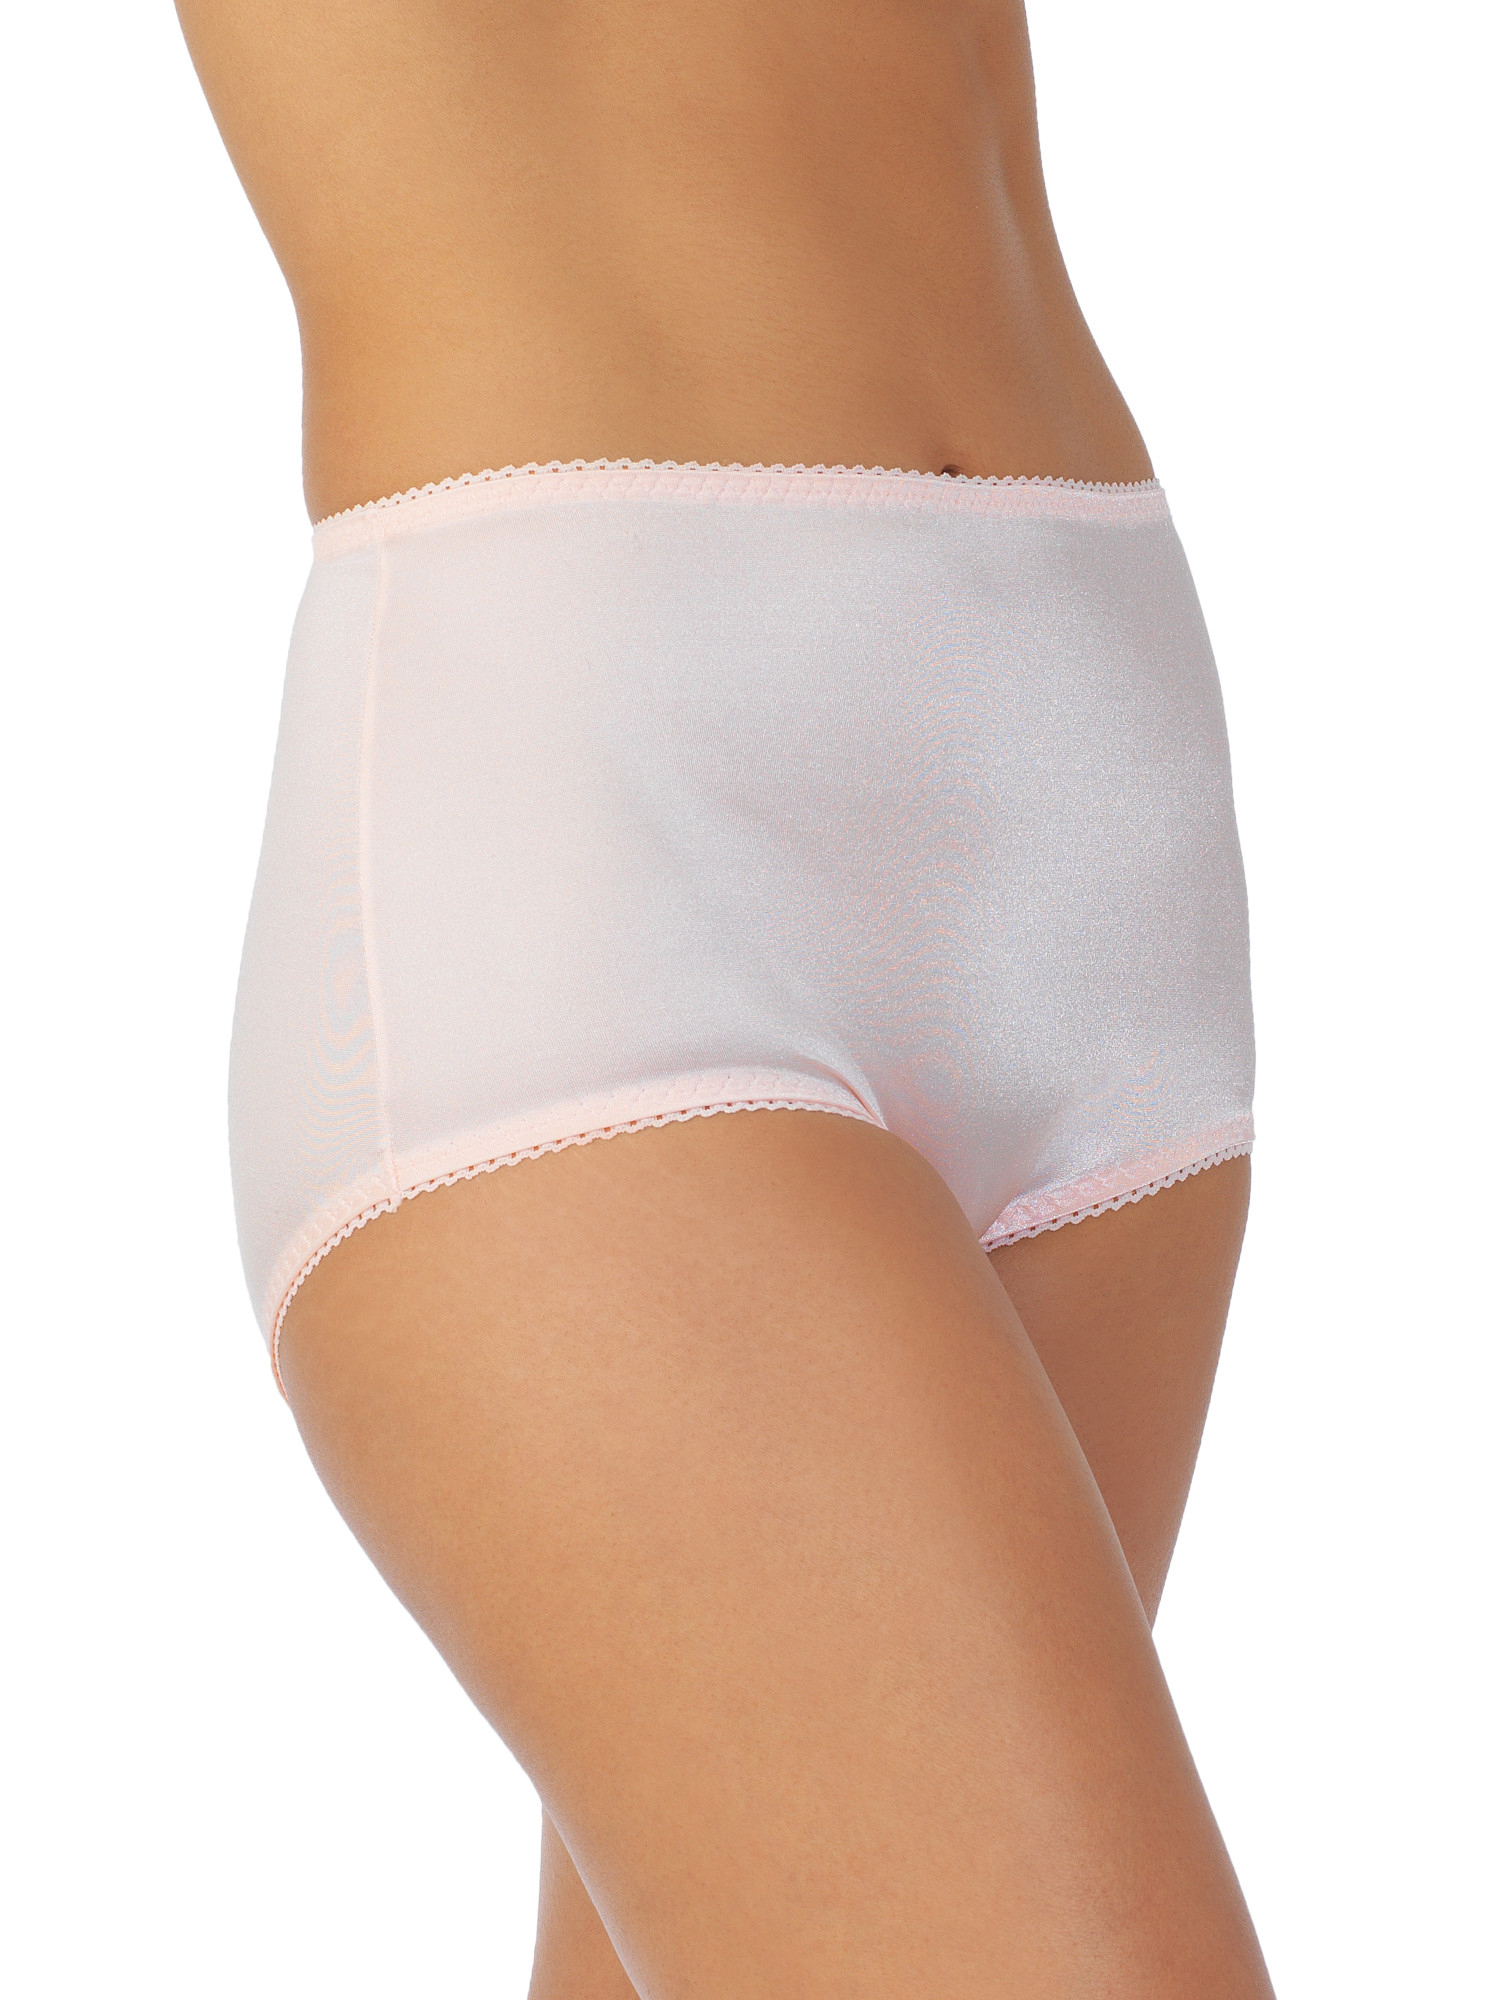 Women's Vassarette 40001 Undershapers Smoothing & Shaping Brief Panty (Blush XL) - image 1 of 4